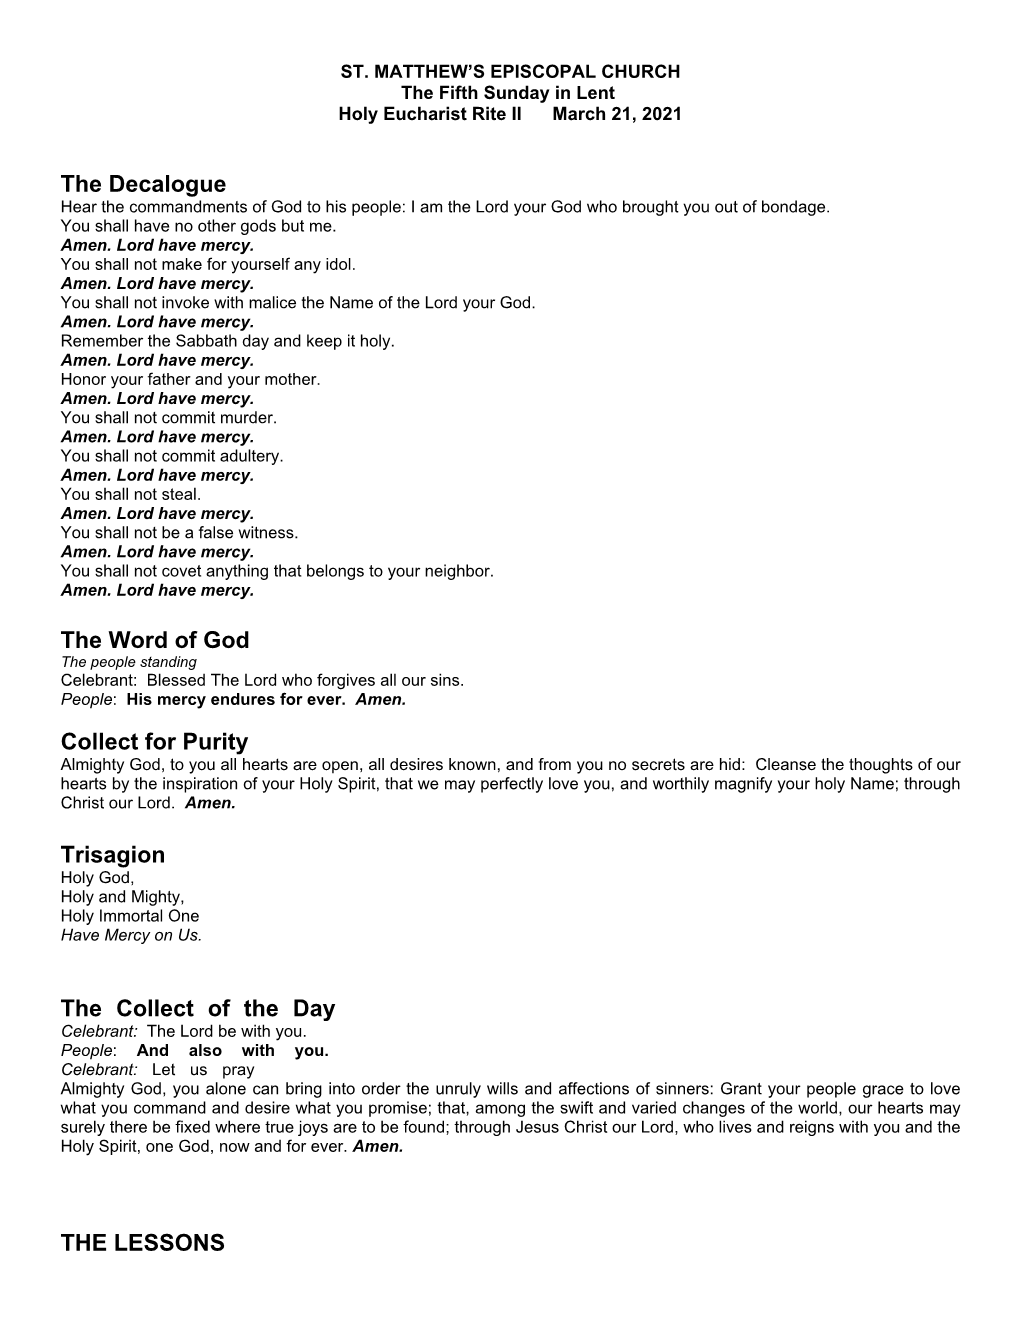 The Decalogue the Word of God Collect for Purity Trisagion the Collect of the Day the LESSONS